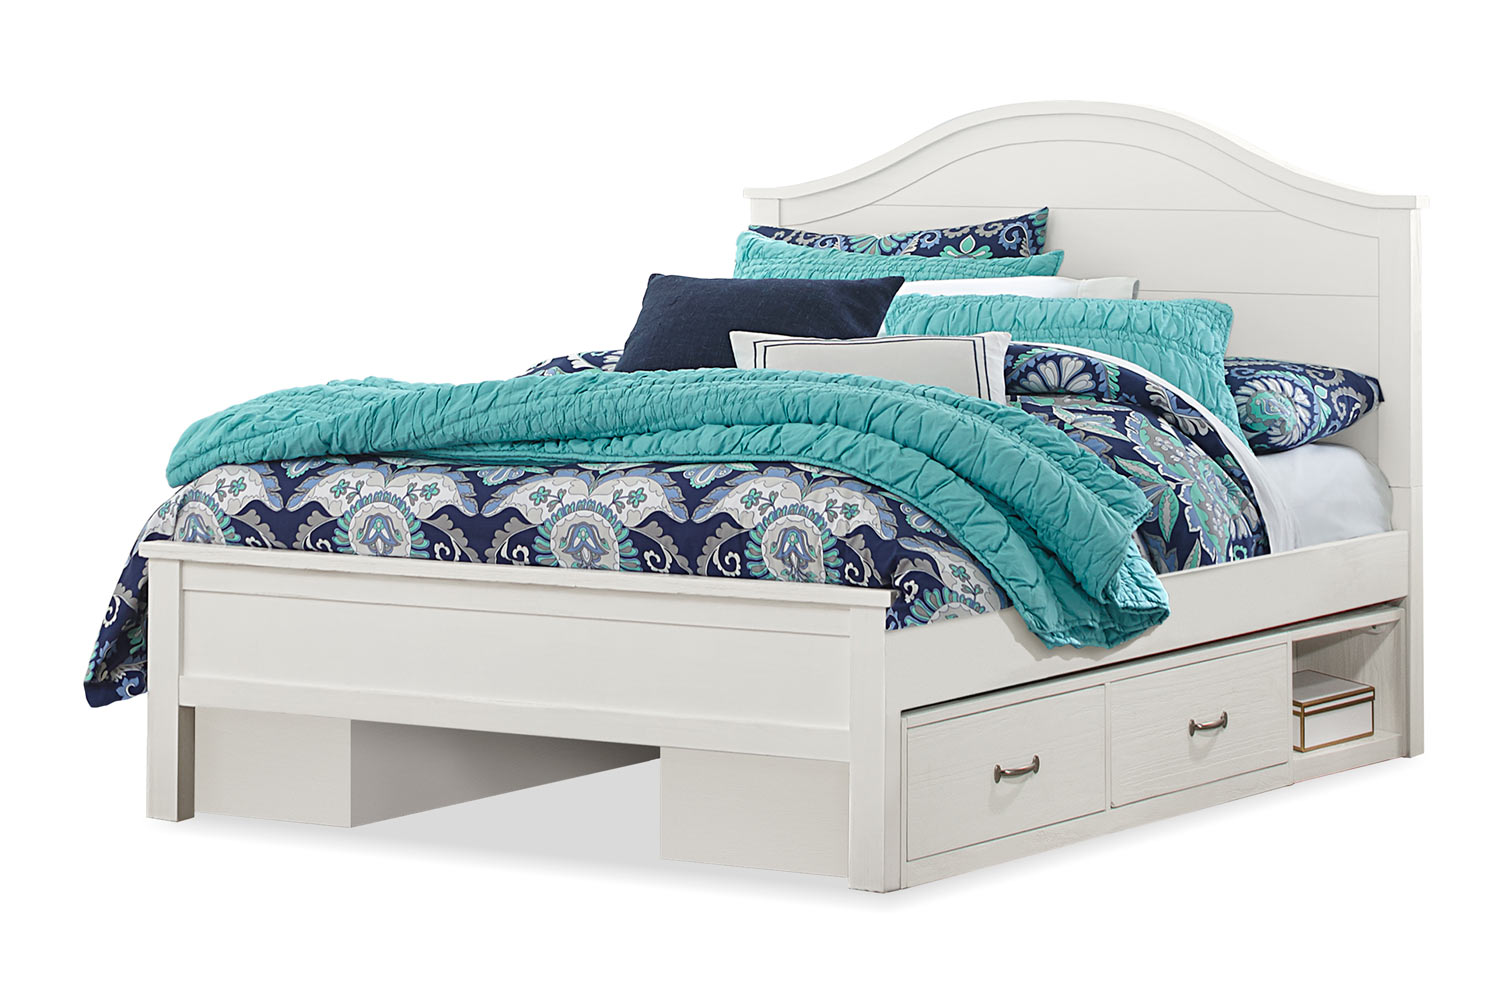 NE Kids Highlands Bailey Arch Bed with (2) Storage Units - White